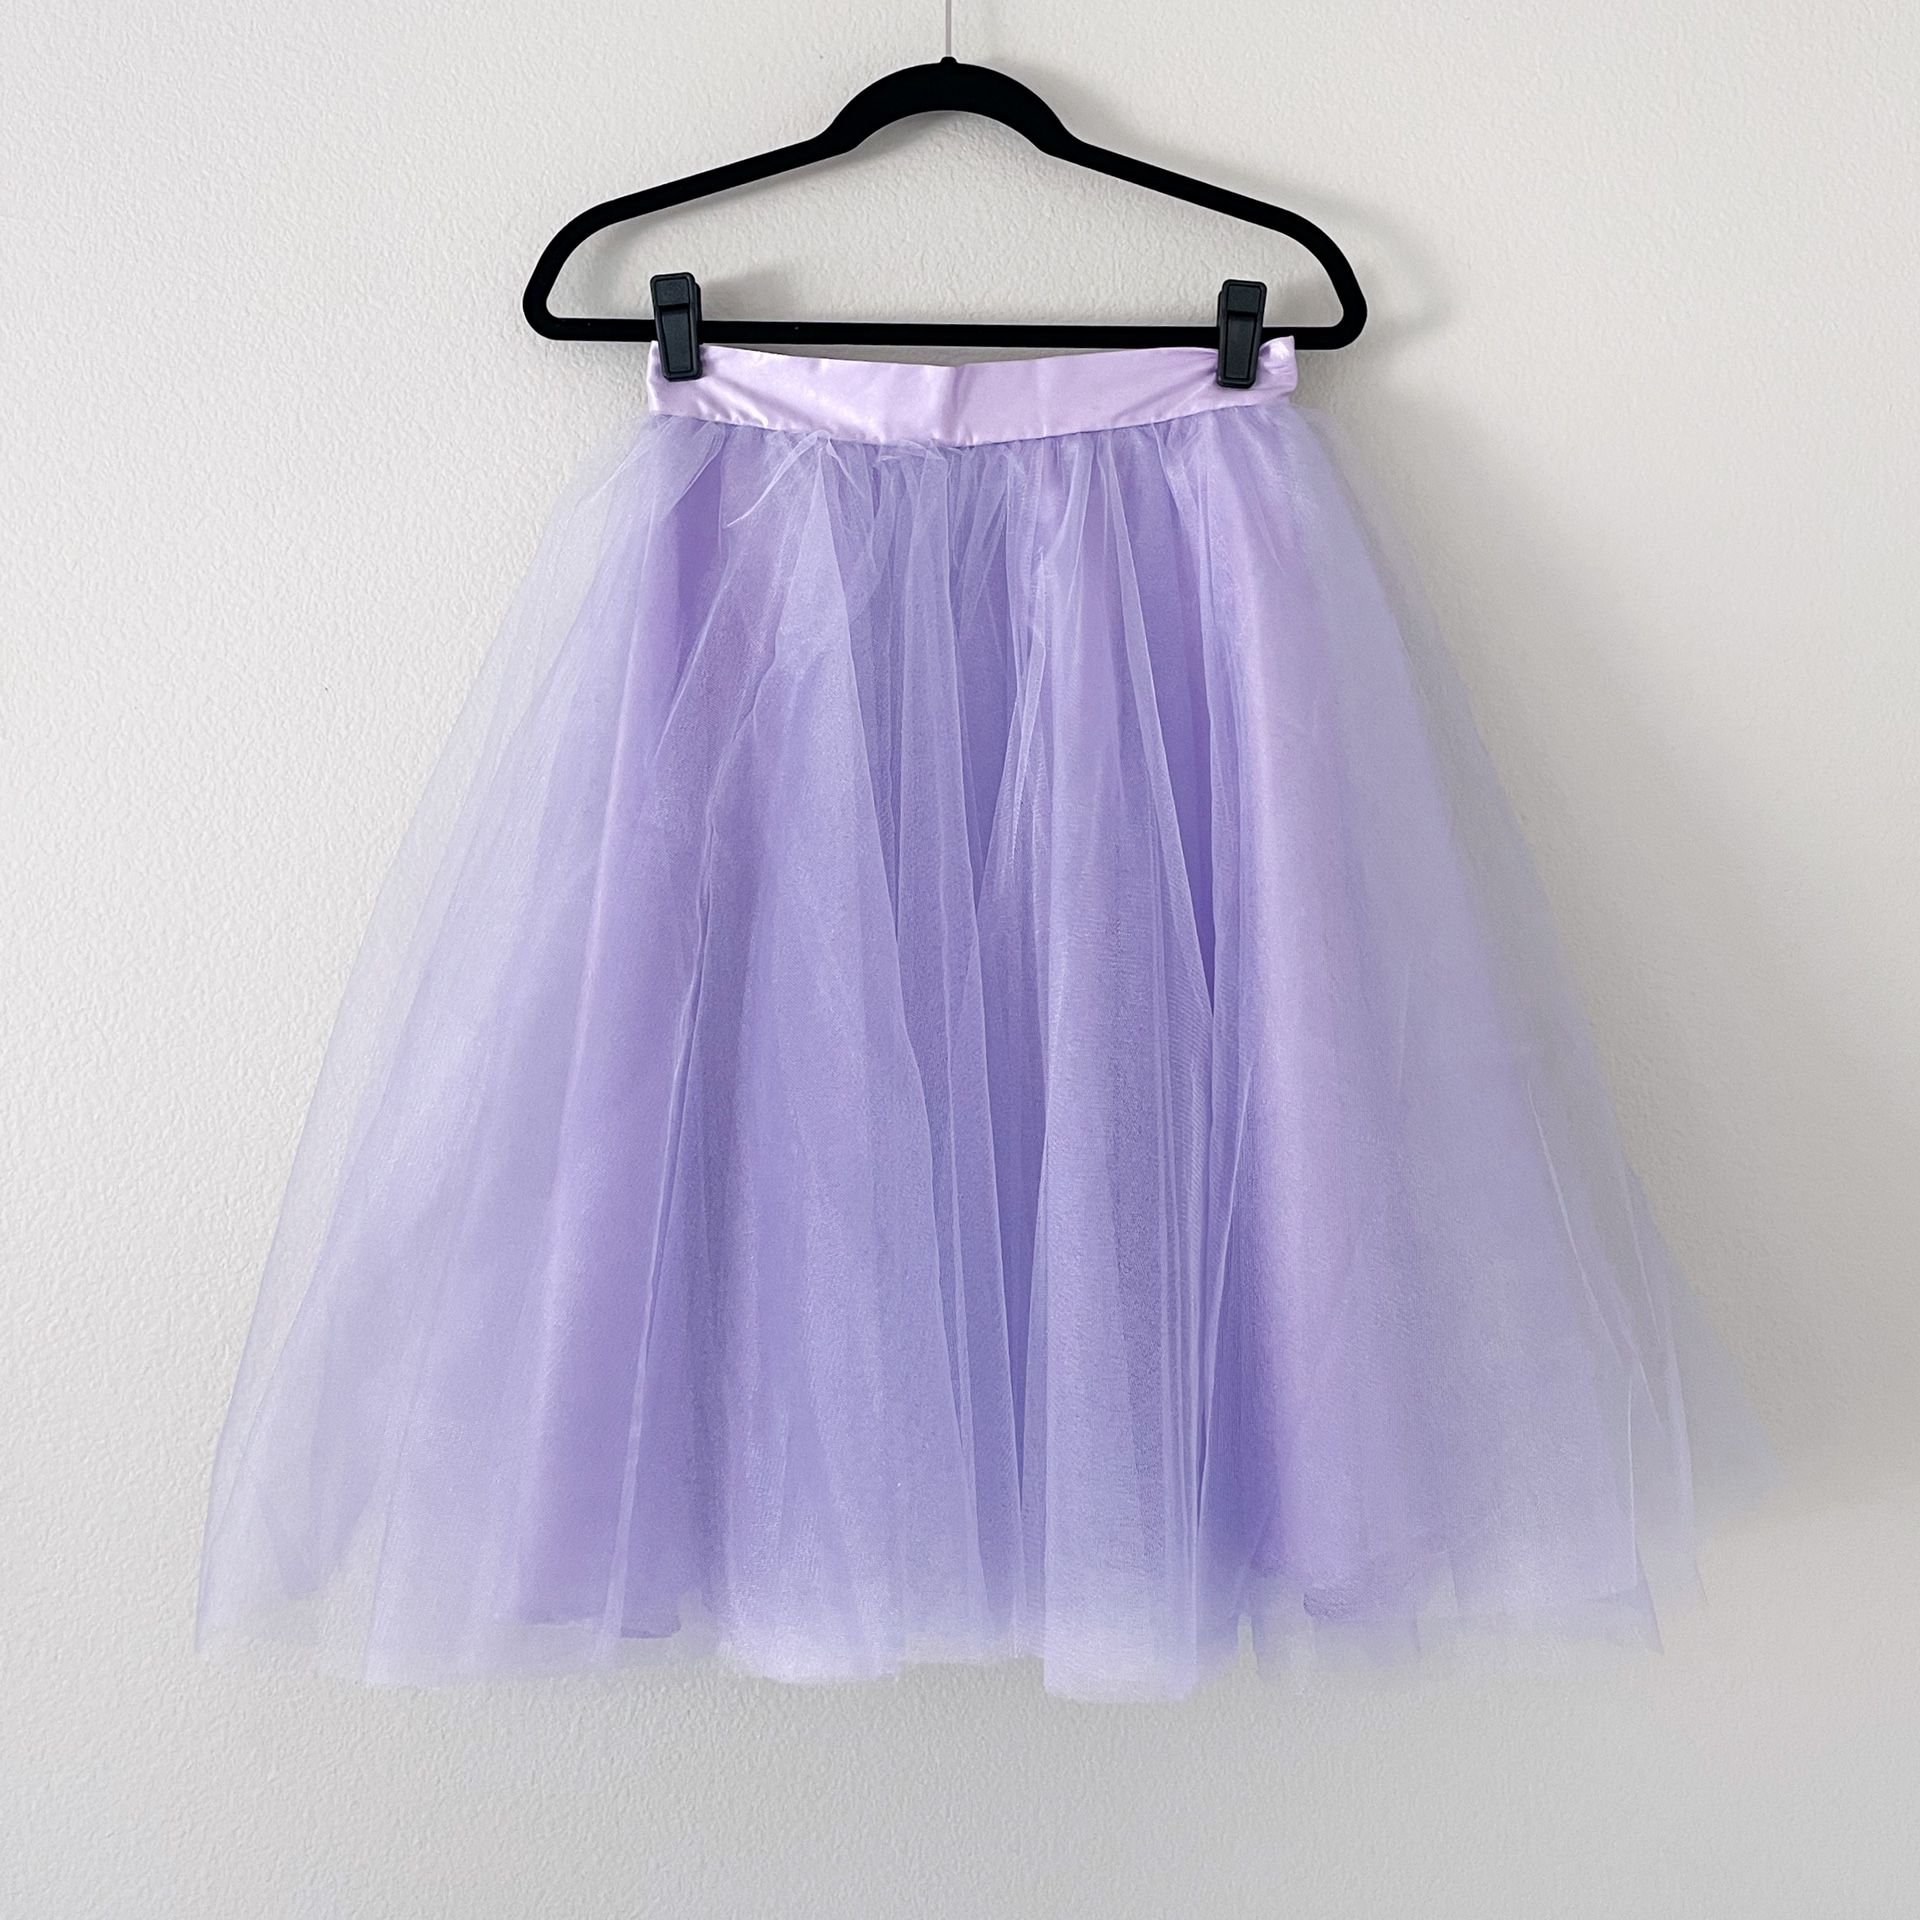 SPACE 46 BOUTIQUE Tulle Tutu Wendy Skirt MRS. POTTS Costume Accessories 4